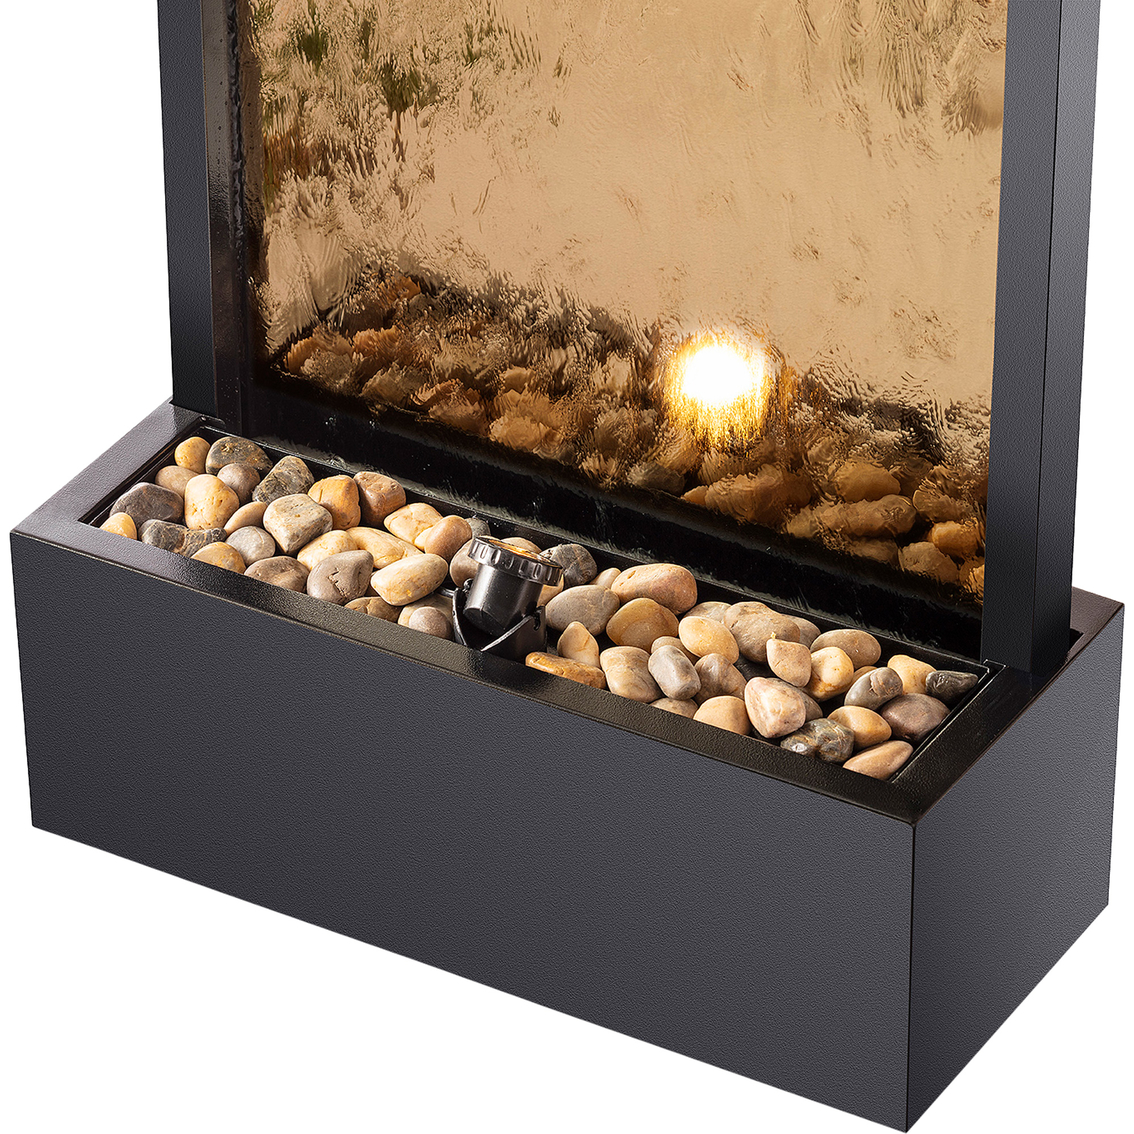 Alpine Bronze Mirror Waterfall Fountain with Stones and Light - Image 4 of 10